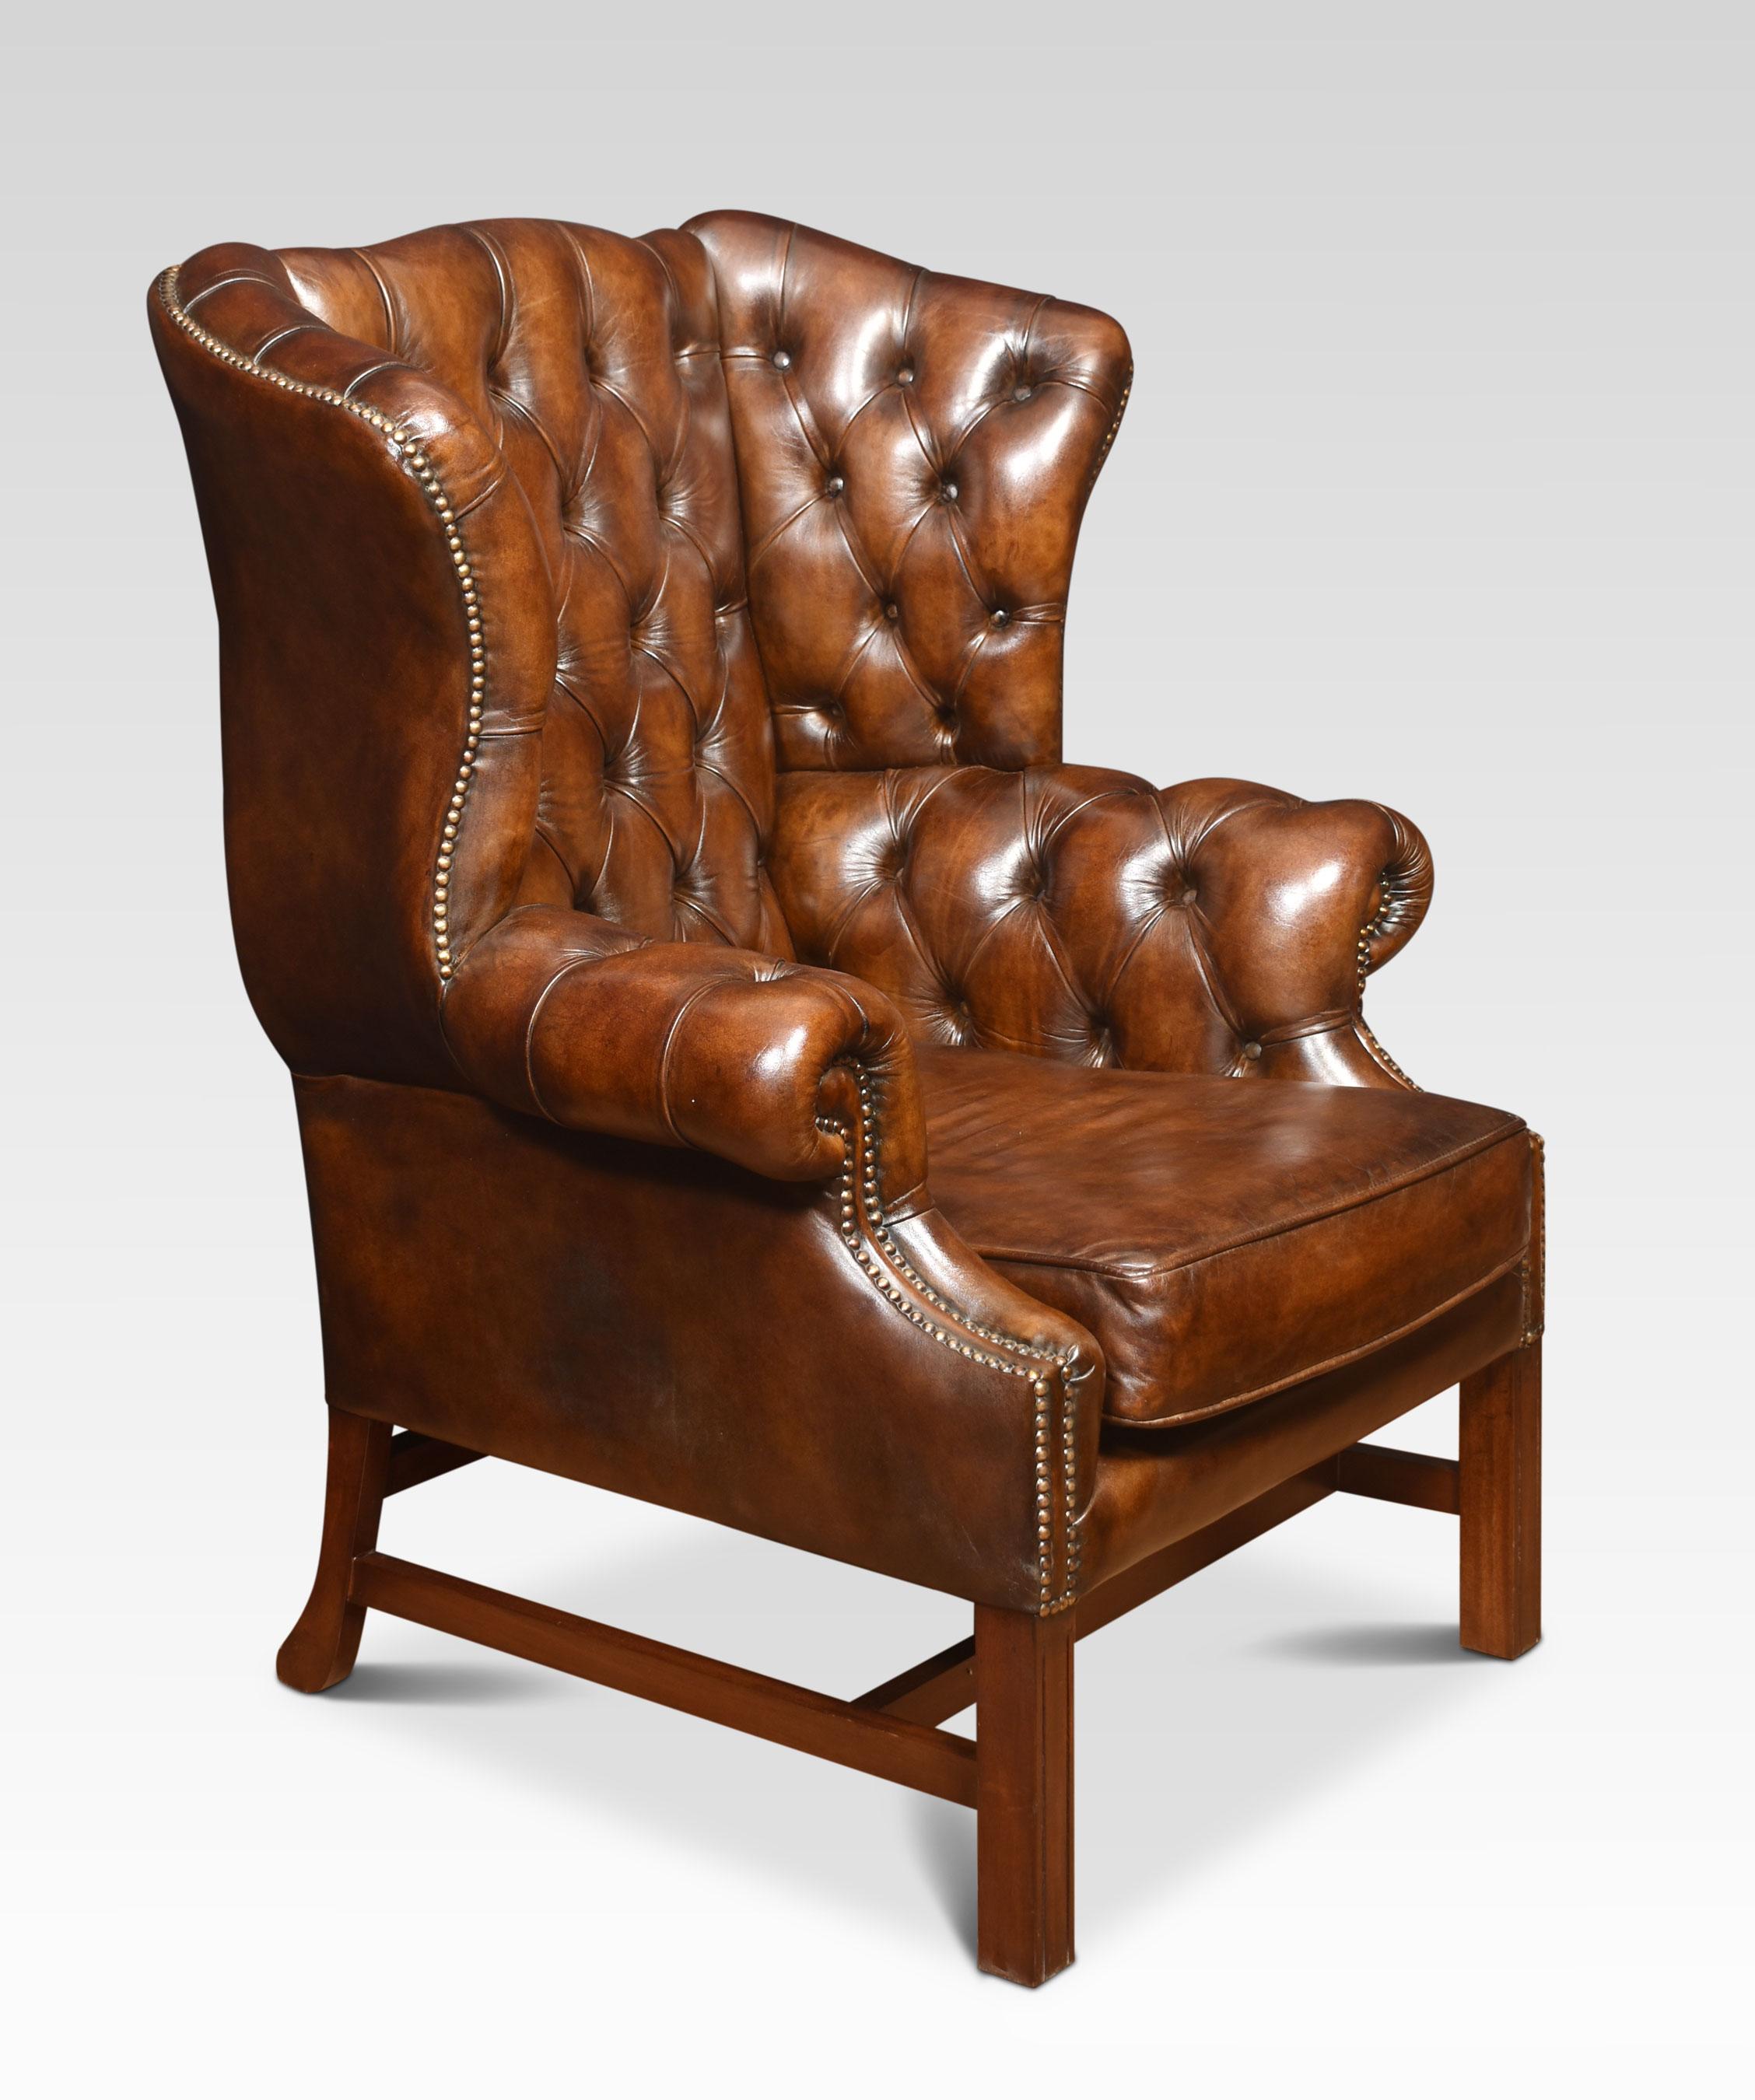 Walnut framed wing armchair of generous proportions, the arched top above deep buttoned back, upholstered arms, and seat in brown leather. All raised up on square supports united by a stretcher
Dimensions
Height 43 Inches height to seat 19